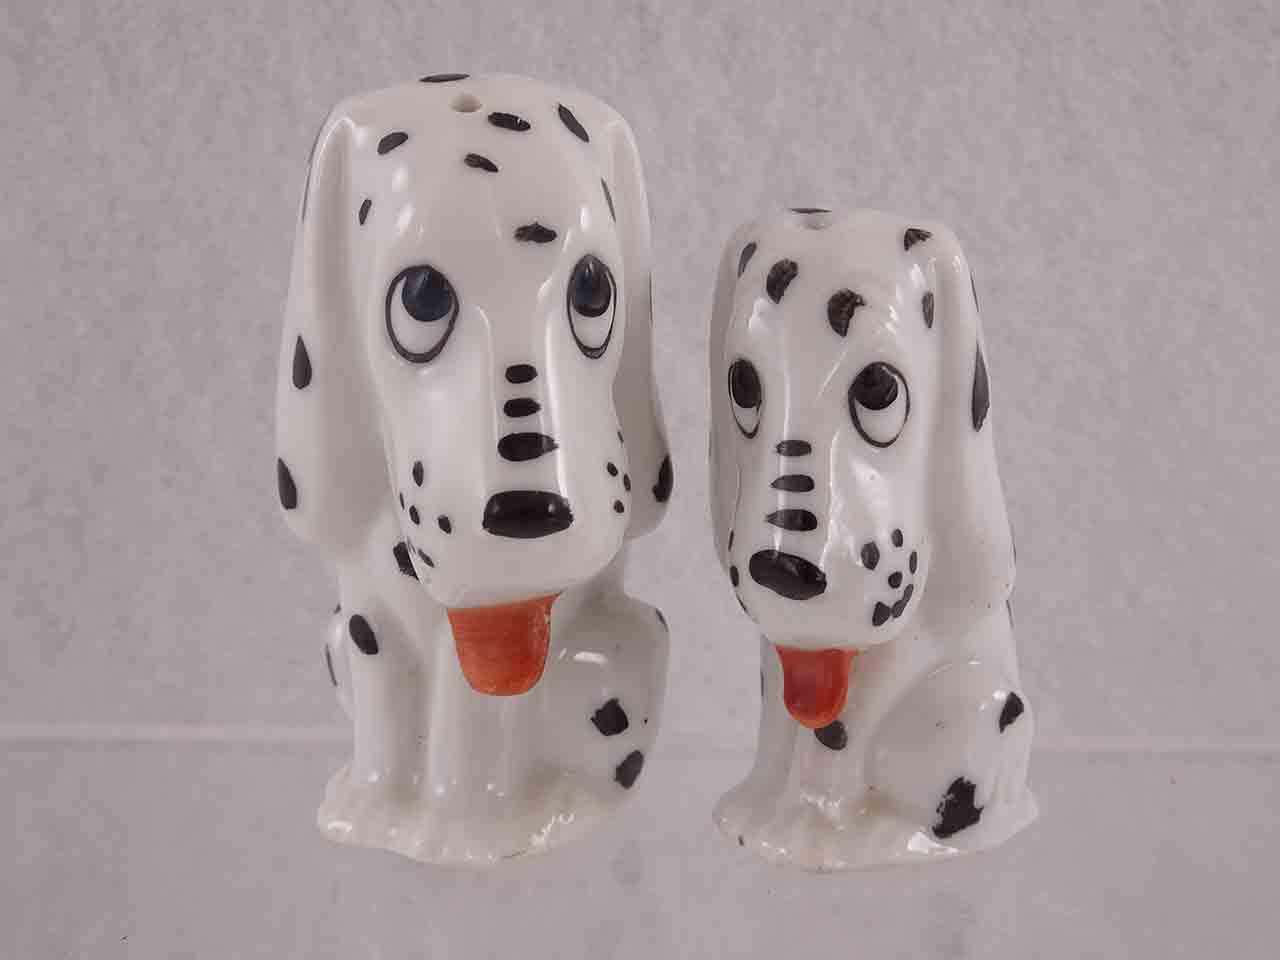 Dismal Desmond Dalmatian dogs from Germany salt and pepper shakers